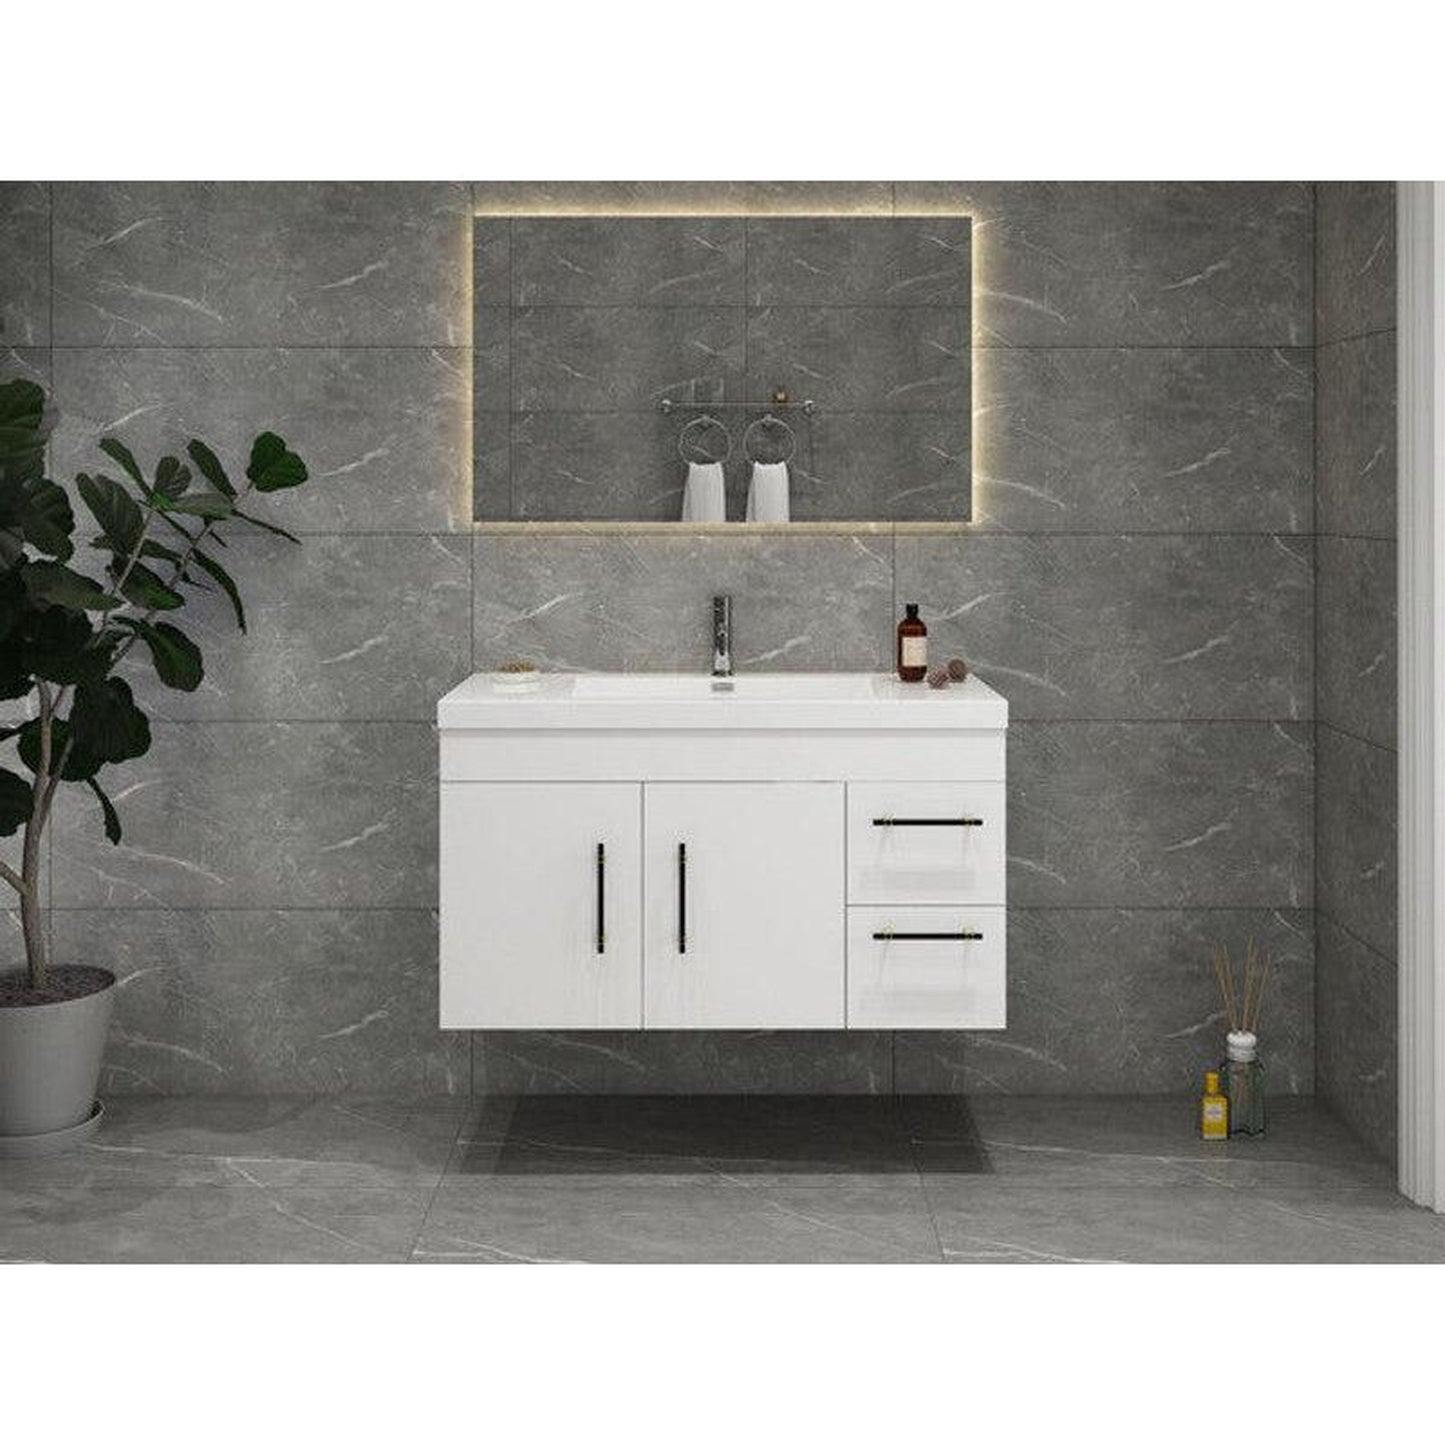 Moreno Bath ELSA 42" High Gloss White Wall-Mounted Vanity With Right Side Drawers and Single Reinforced White Acrylic Sink